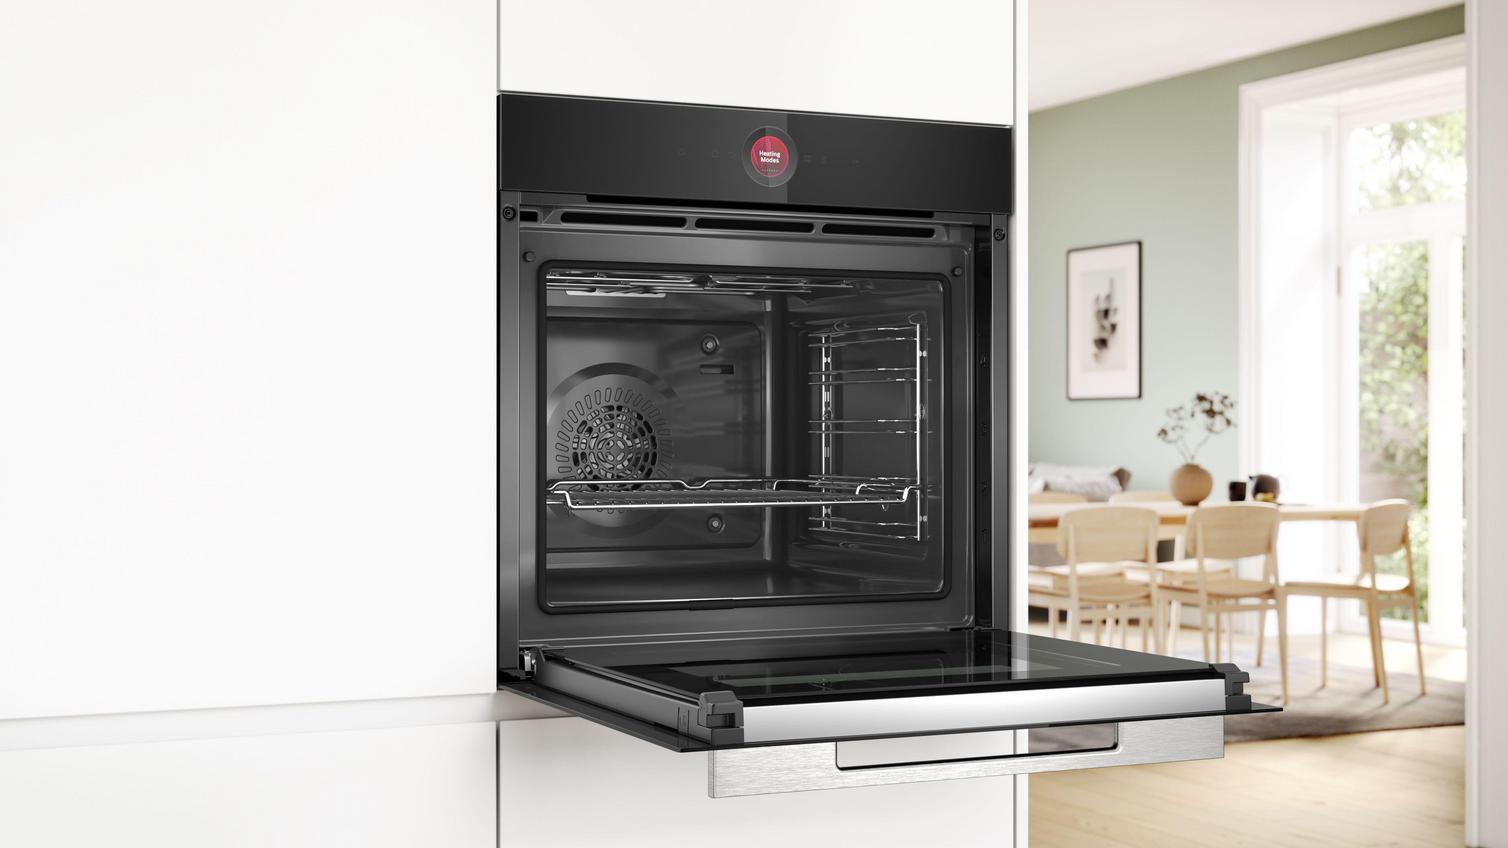 Bosch Black Single Electric Oven Series 8 Open Side View